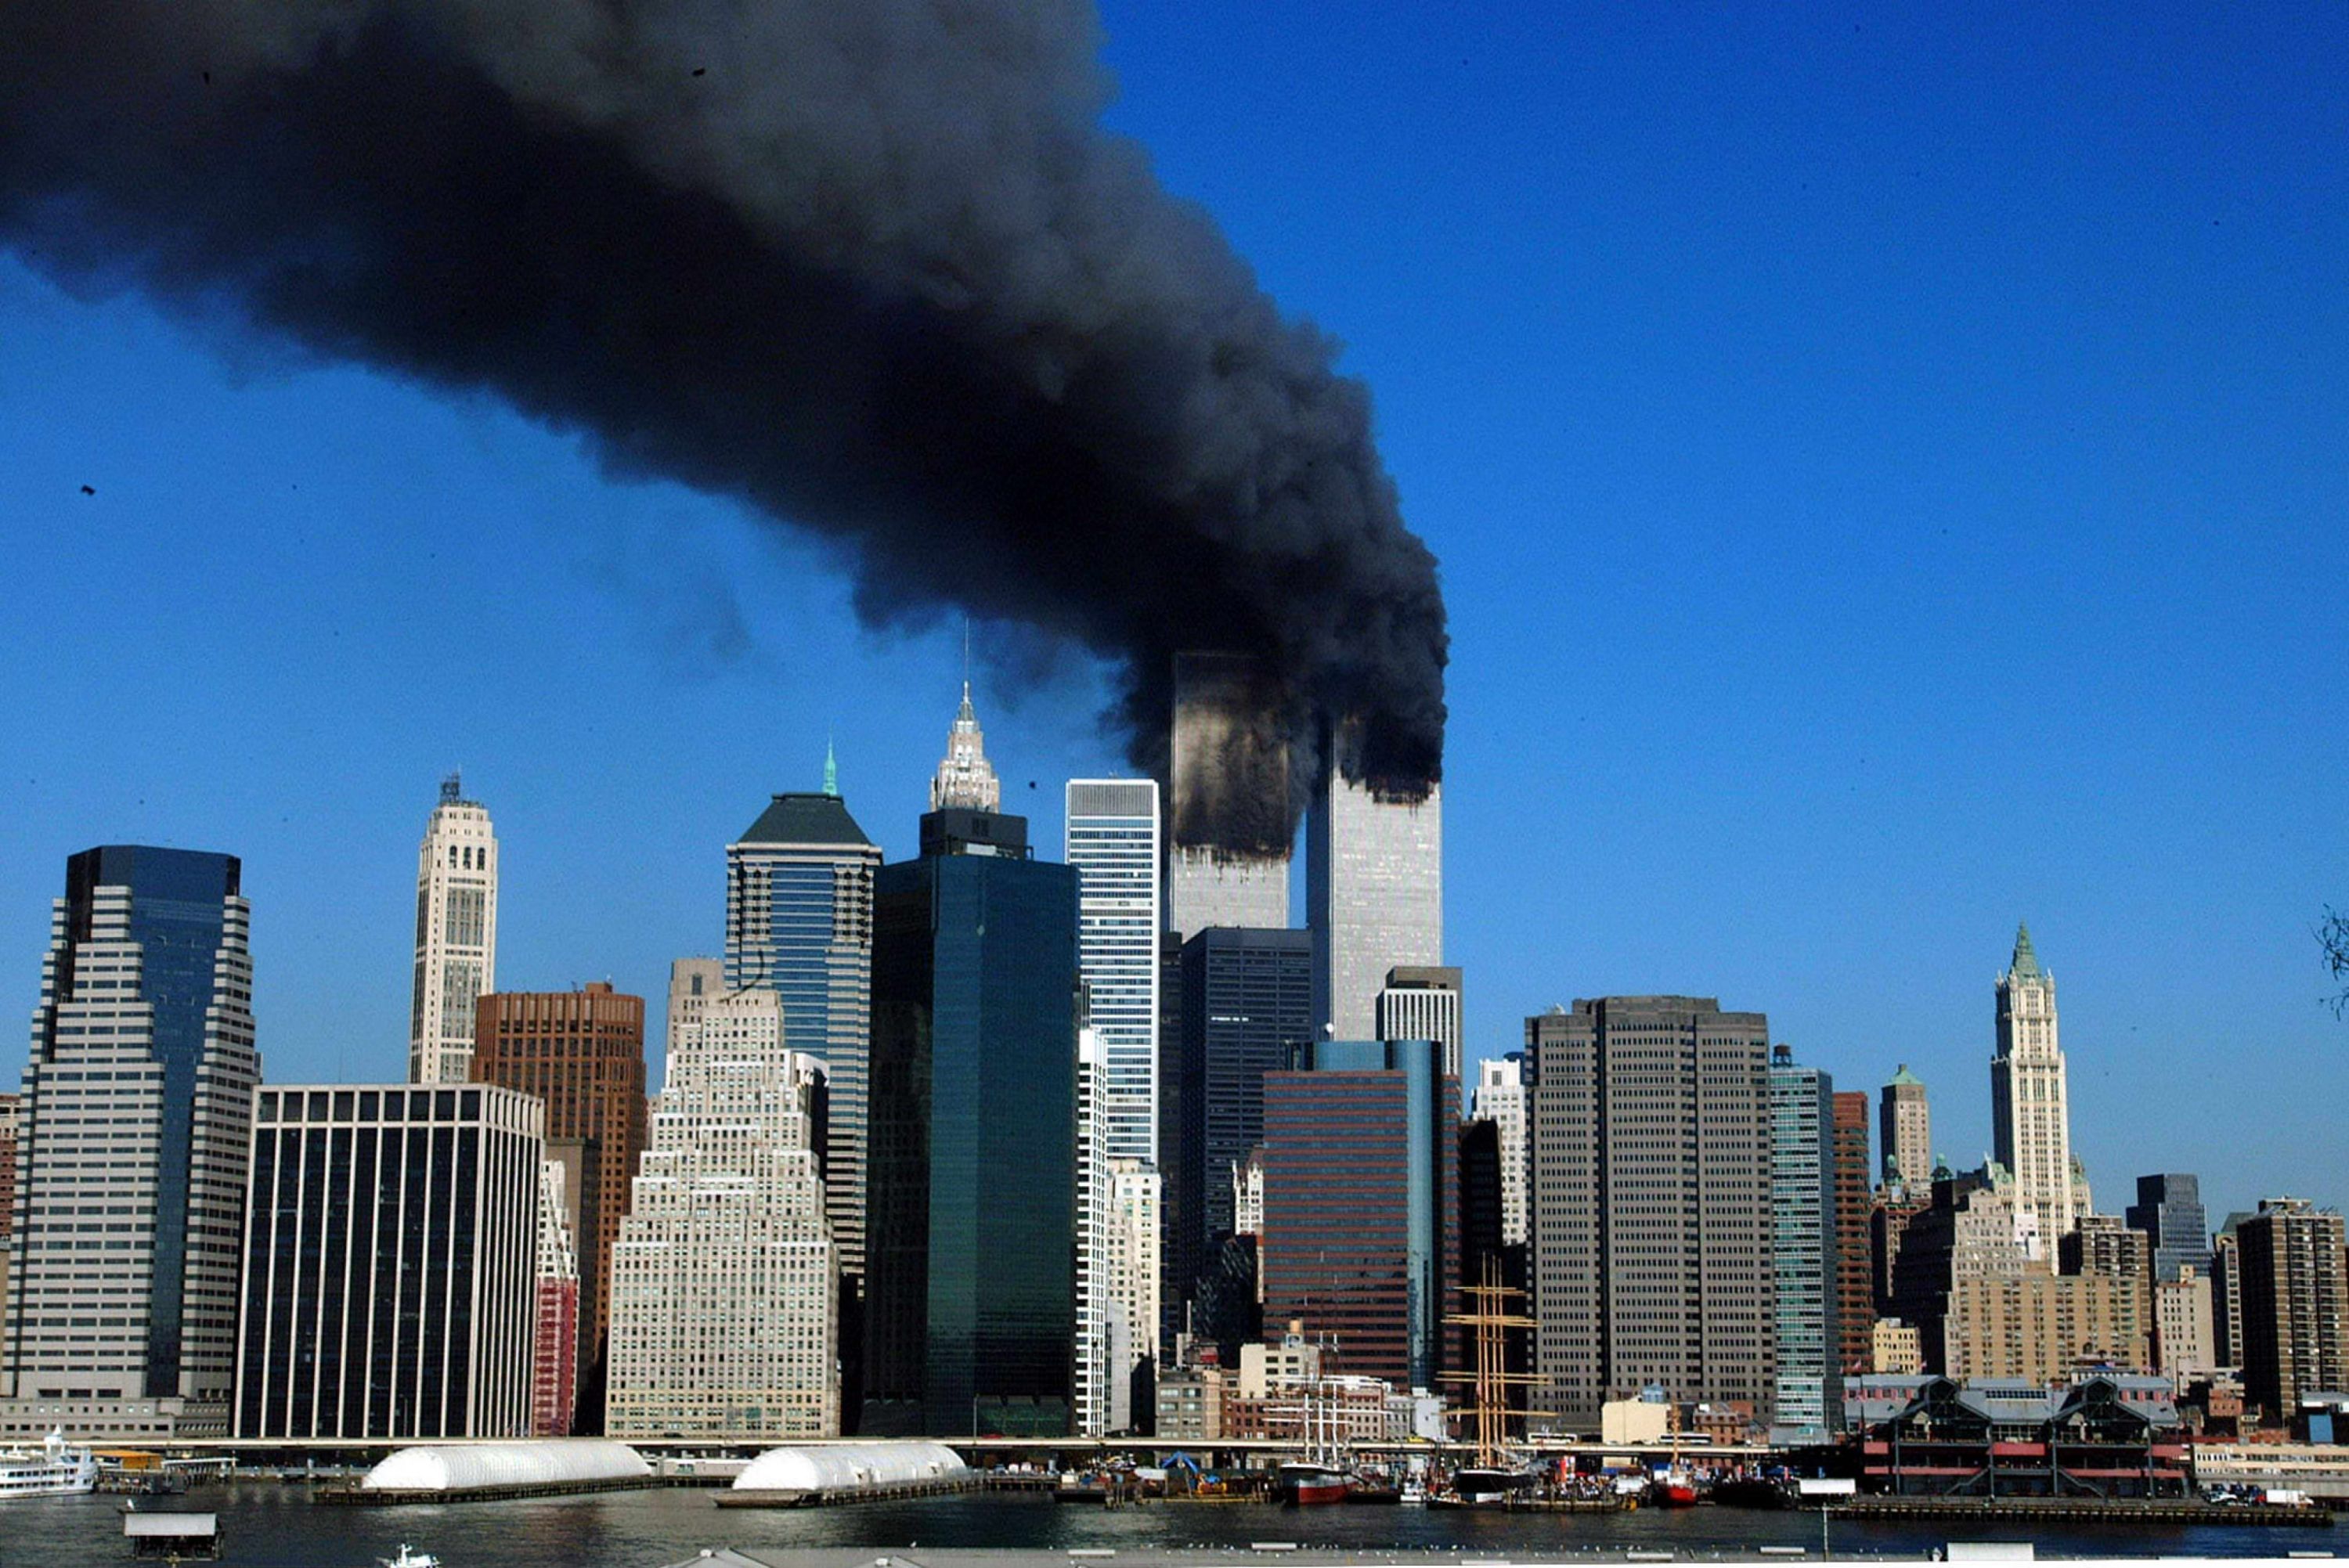 The twin towers of the World Trade Center billow smoke after hijacked airliners crashed into them early 11 September, 2001. The suspected terrorist attack has caused the collapsed of both towers. AFP PHOTO/Henny Ray ABRAMS (Photo credit should read HENNY RAY ABRAMS/AFP via Getty Images)